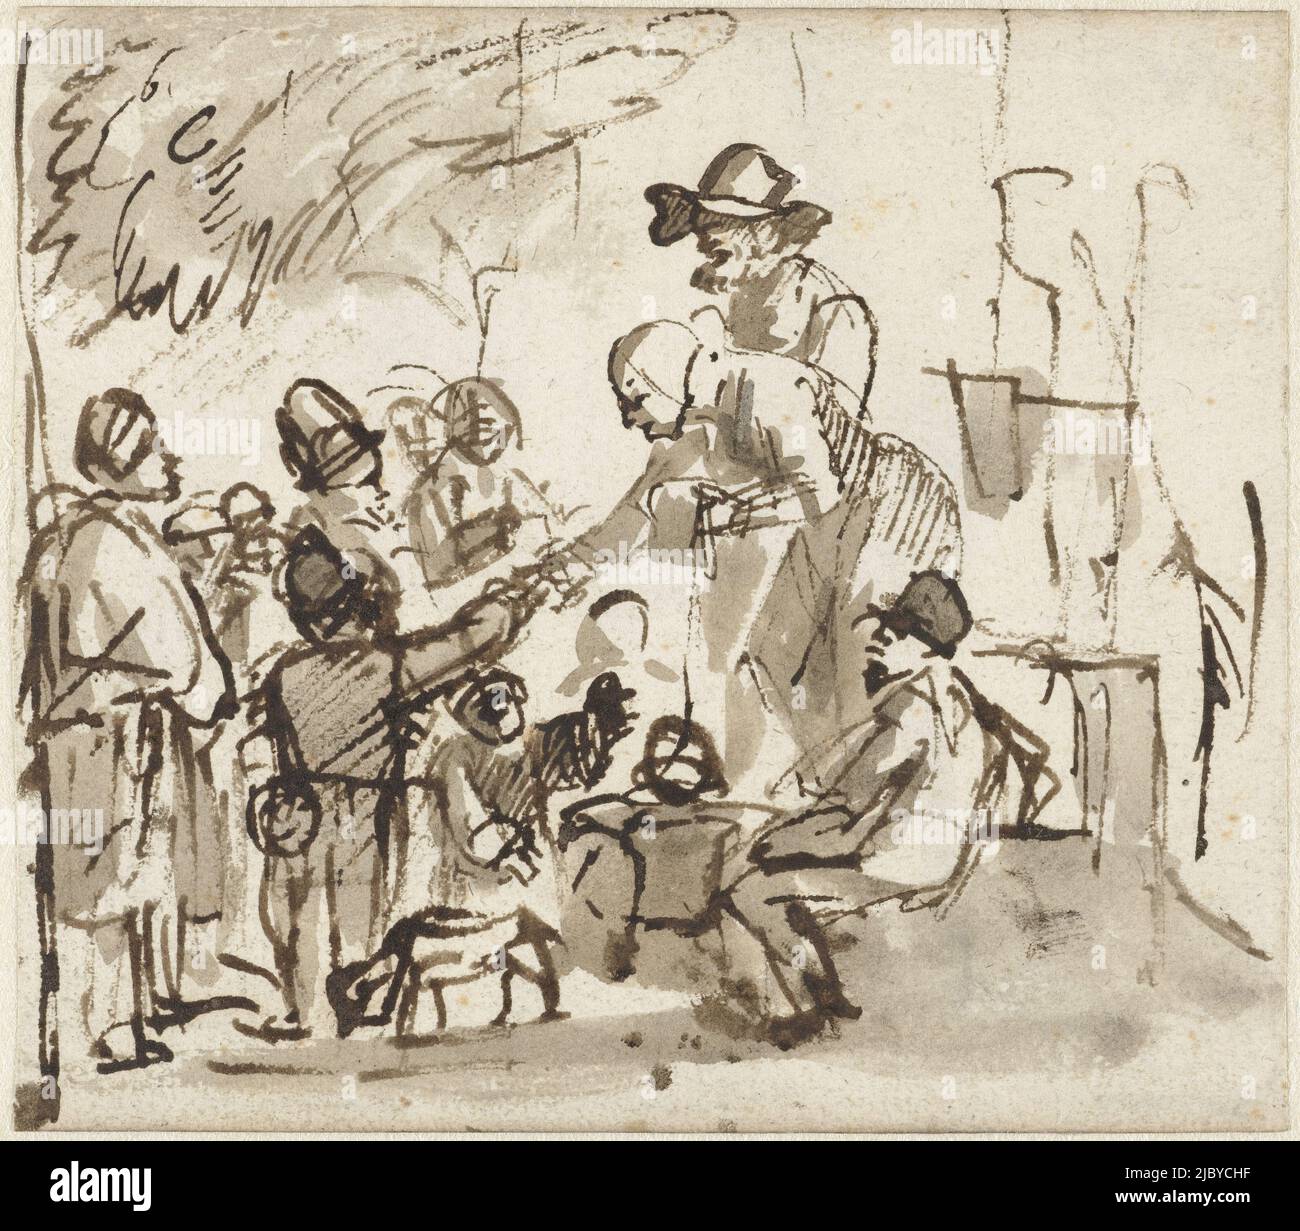 Old couple handing out wares to children in the open air, Carel Fabritius (attributed to), 1640 - 1645, draughtsman: Carel Fabritius, (attributed to), 1640 - 1645, paper, pen, brush, h 98 mm × w 109 mm Stock Photo